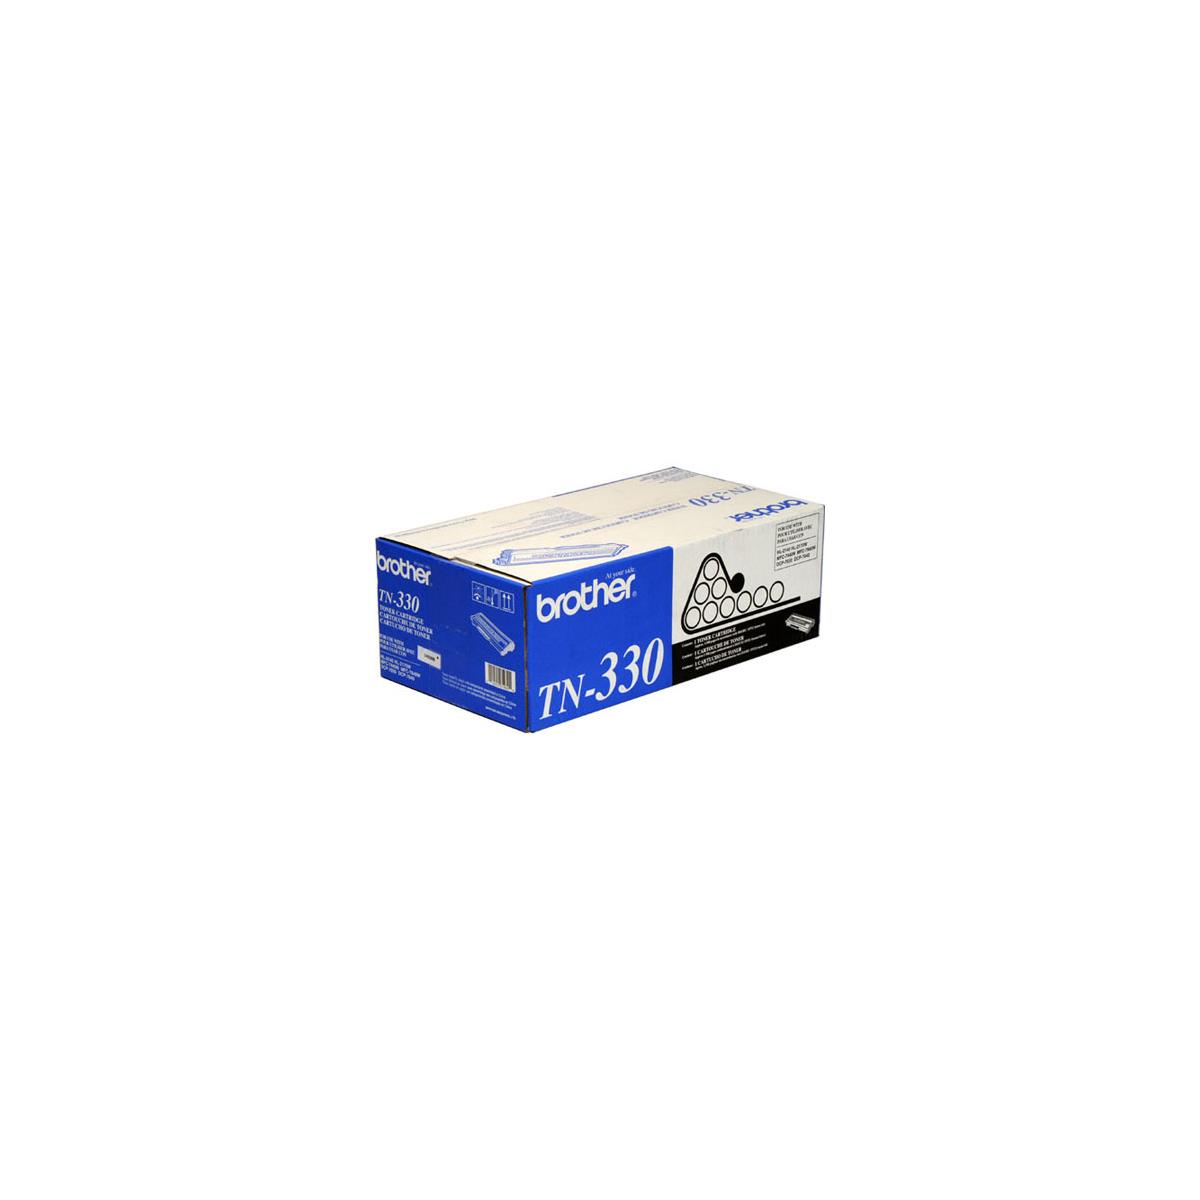 Brother TN330 Standard Blk Tonr Cartridge,1500 Pg Yield The original Brother TN330 Standard Black Toner Cartridge, for use with HL-2140, HL-2170W, MFC-7440N, MFC-7840W. Yields: 1500 Pages based on 5% coverage.